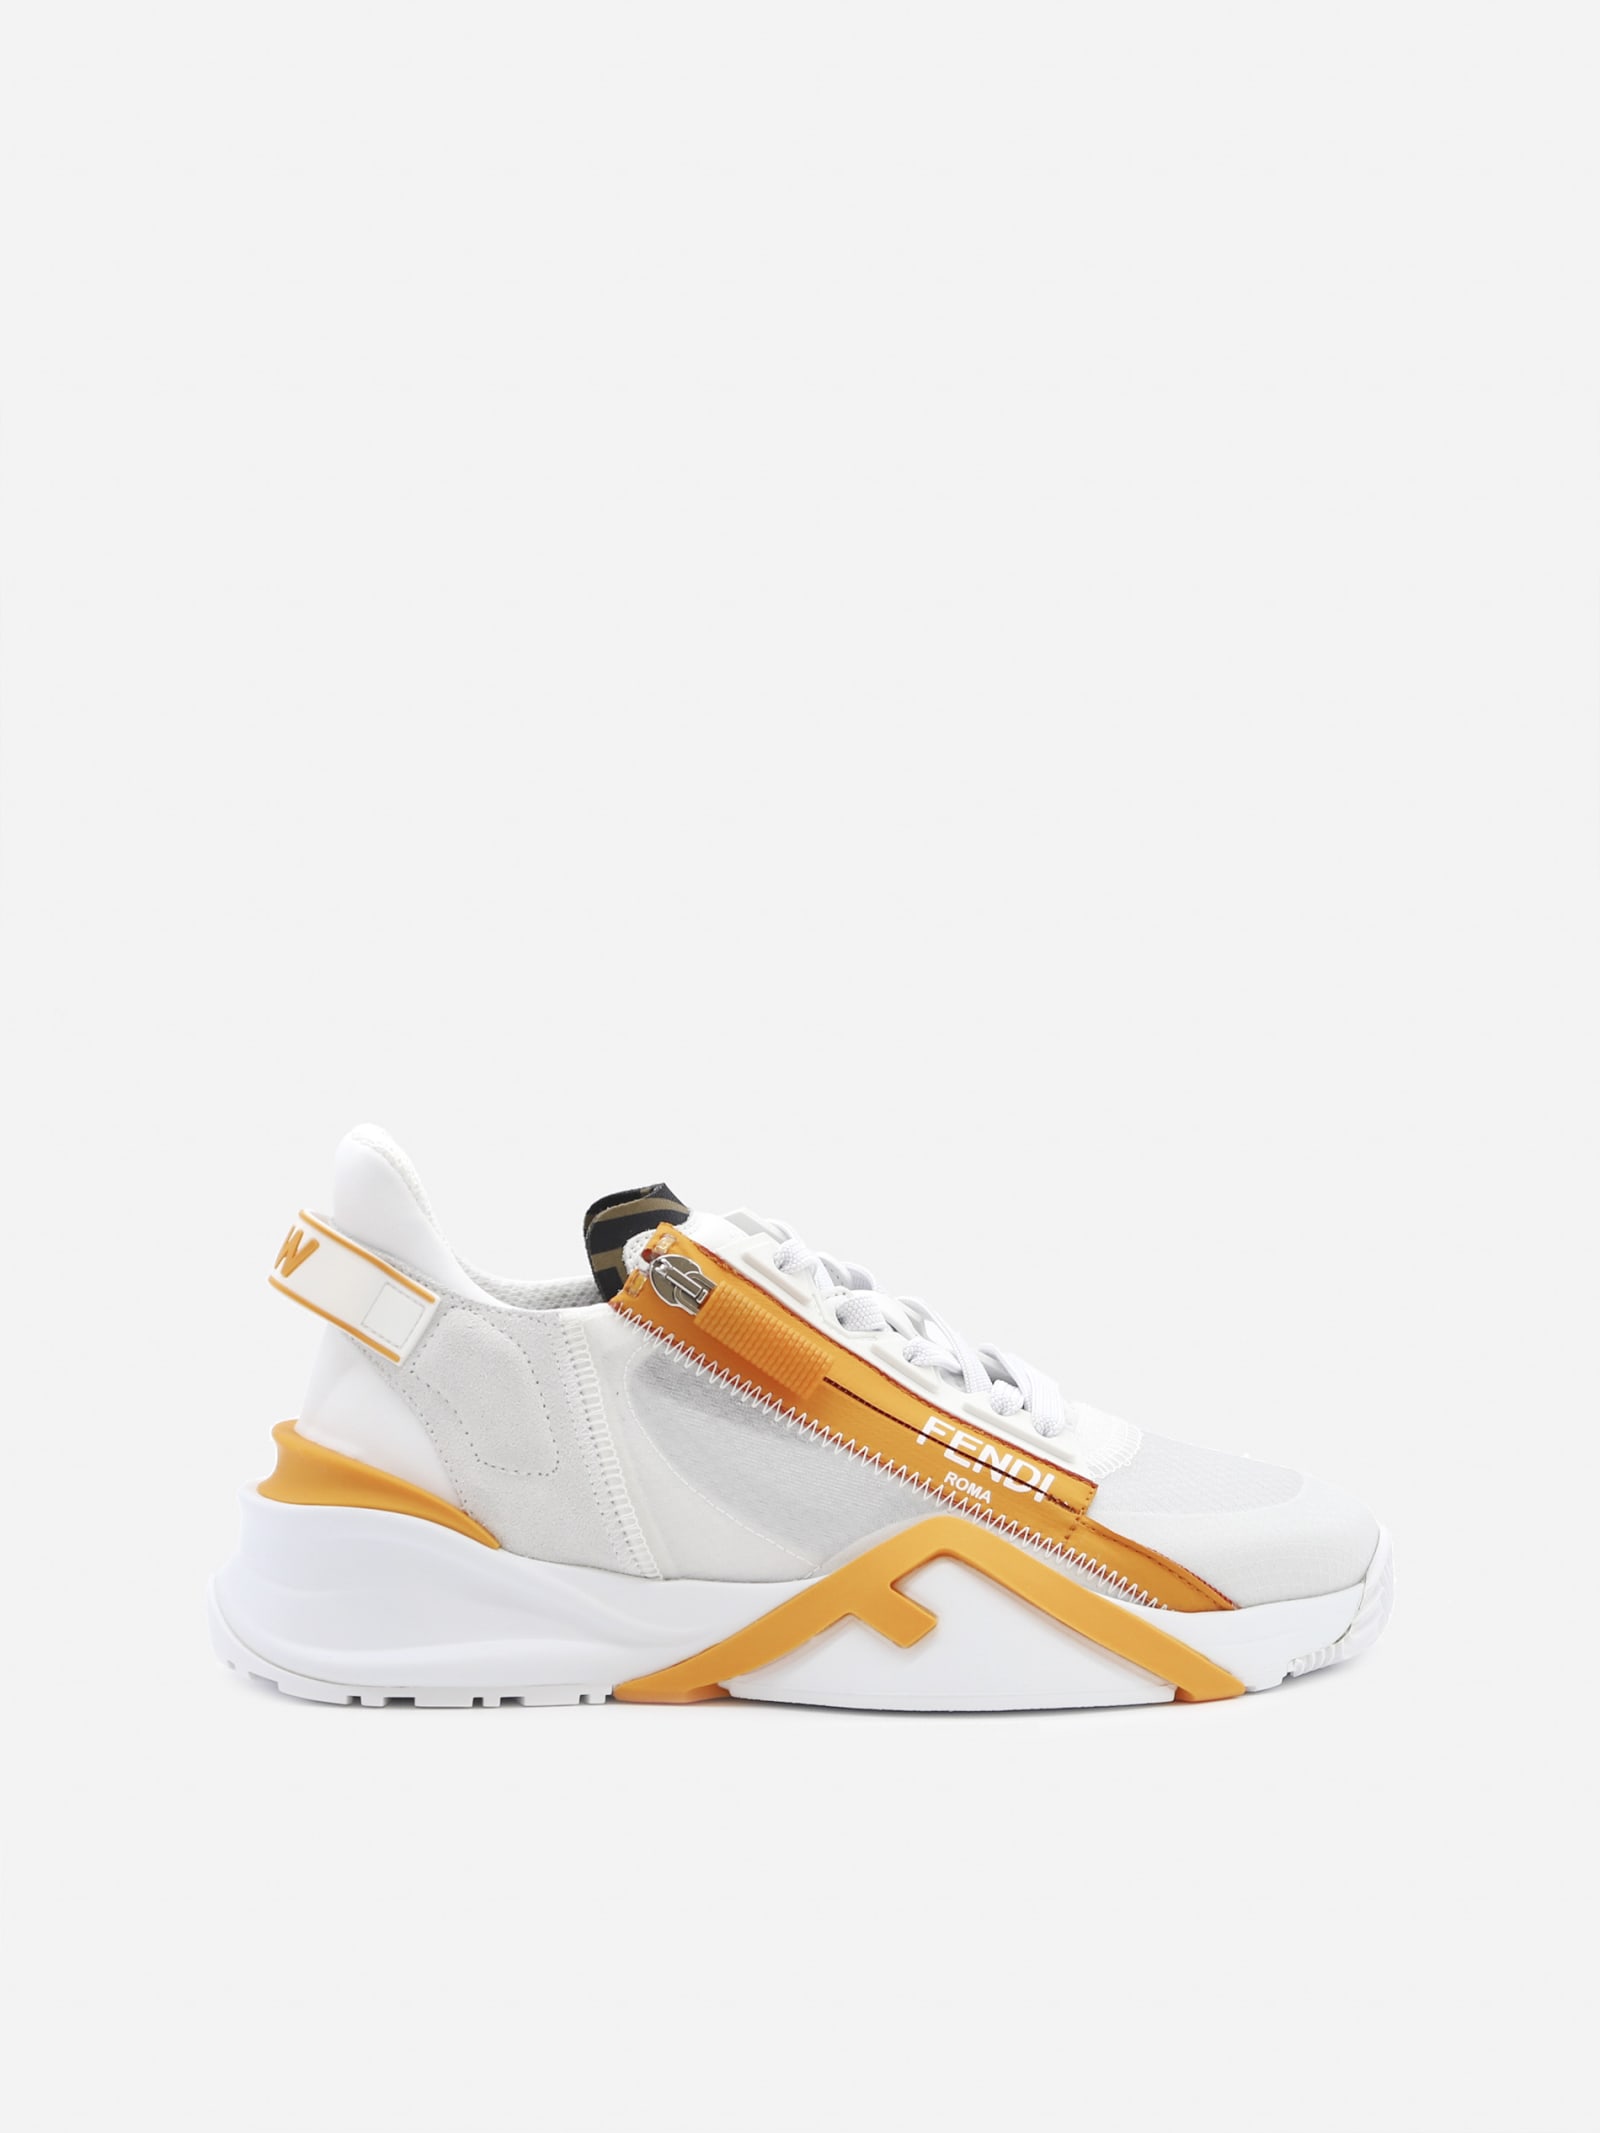 Buy Fendi Fendi Flow Sneakers In Nylon And Suede online, shop Fendi shoes with free shipping